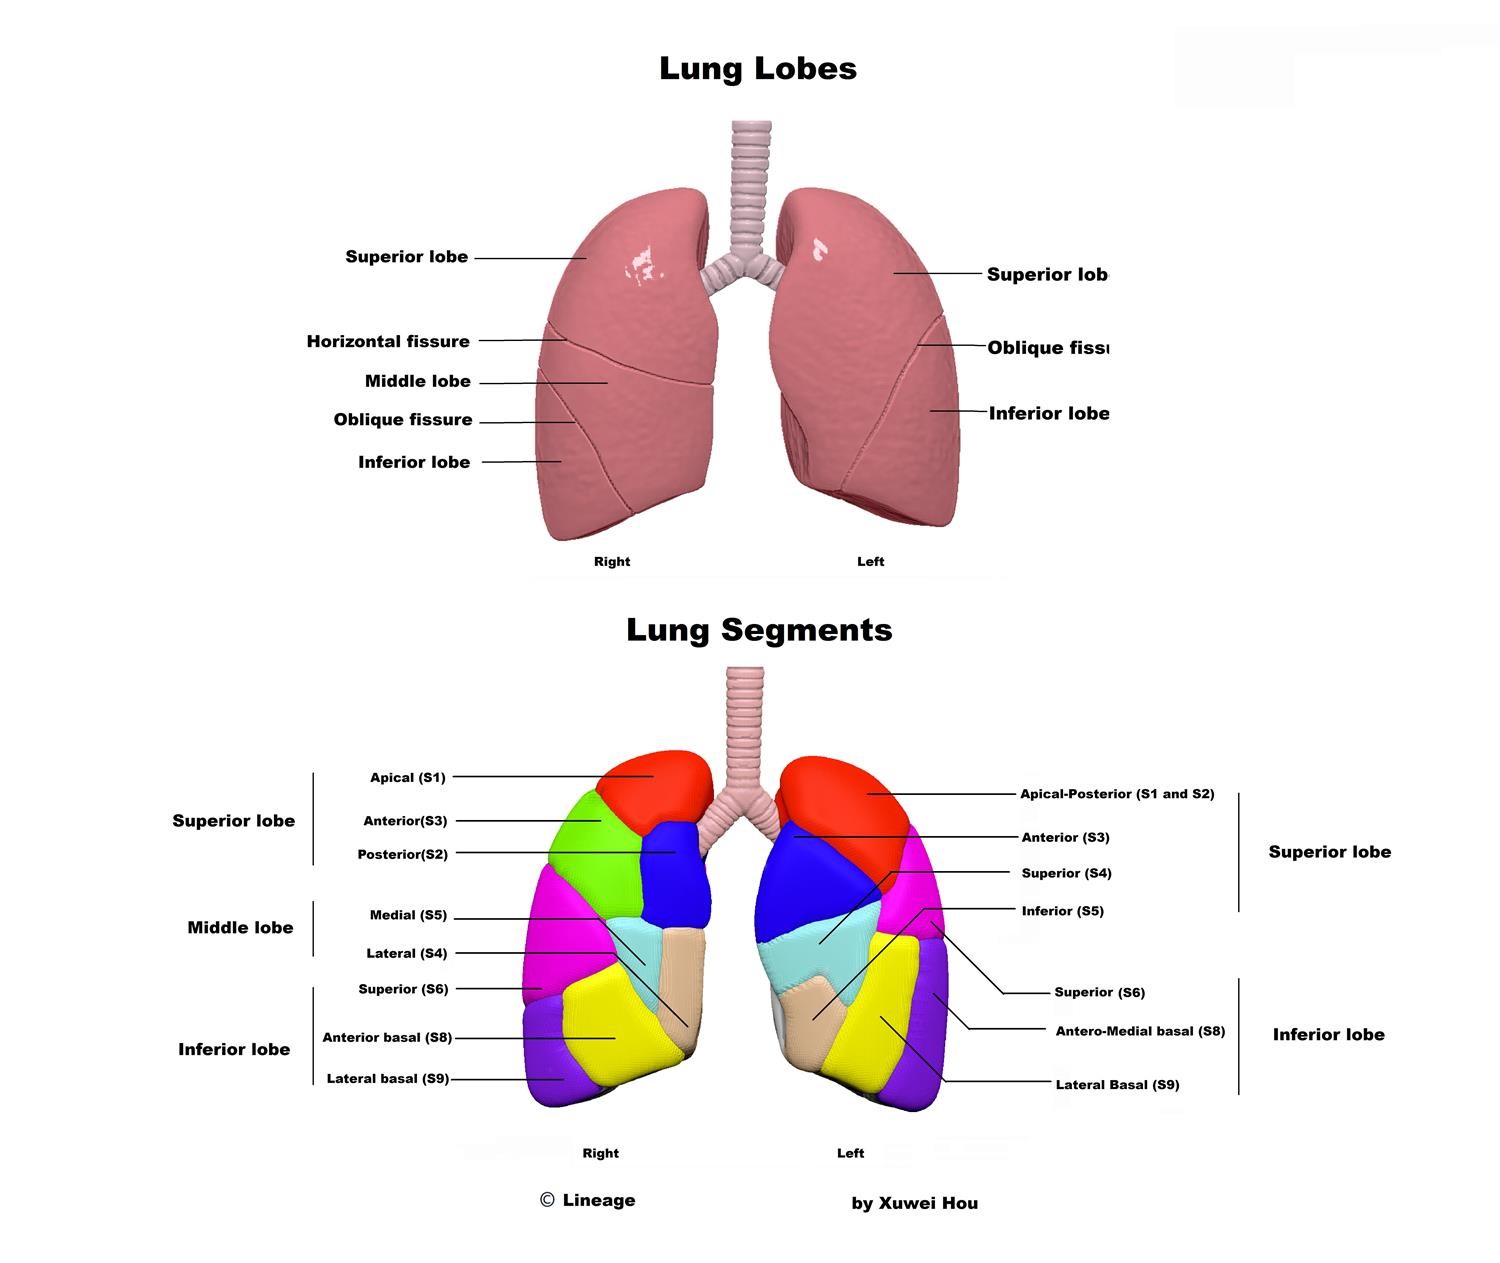 Figure 1: The lung segments can be standardized (left lung: 7 segments; right lung: 8 segments). However, patient-specific variations often occur.